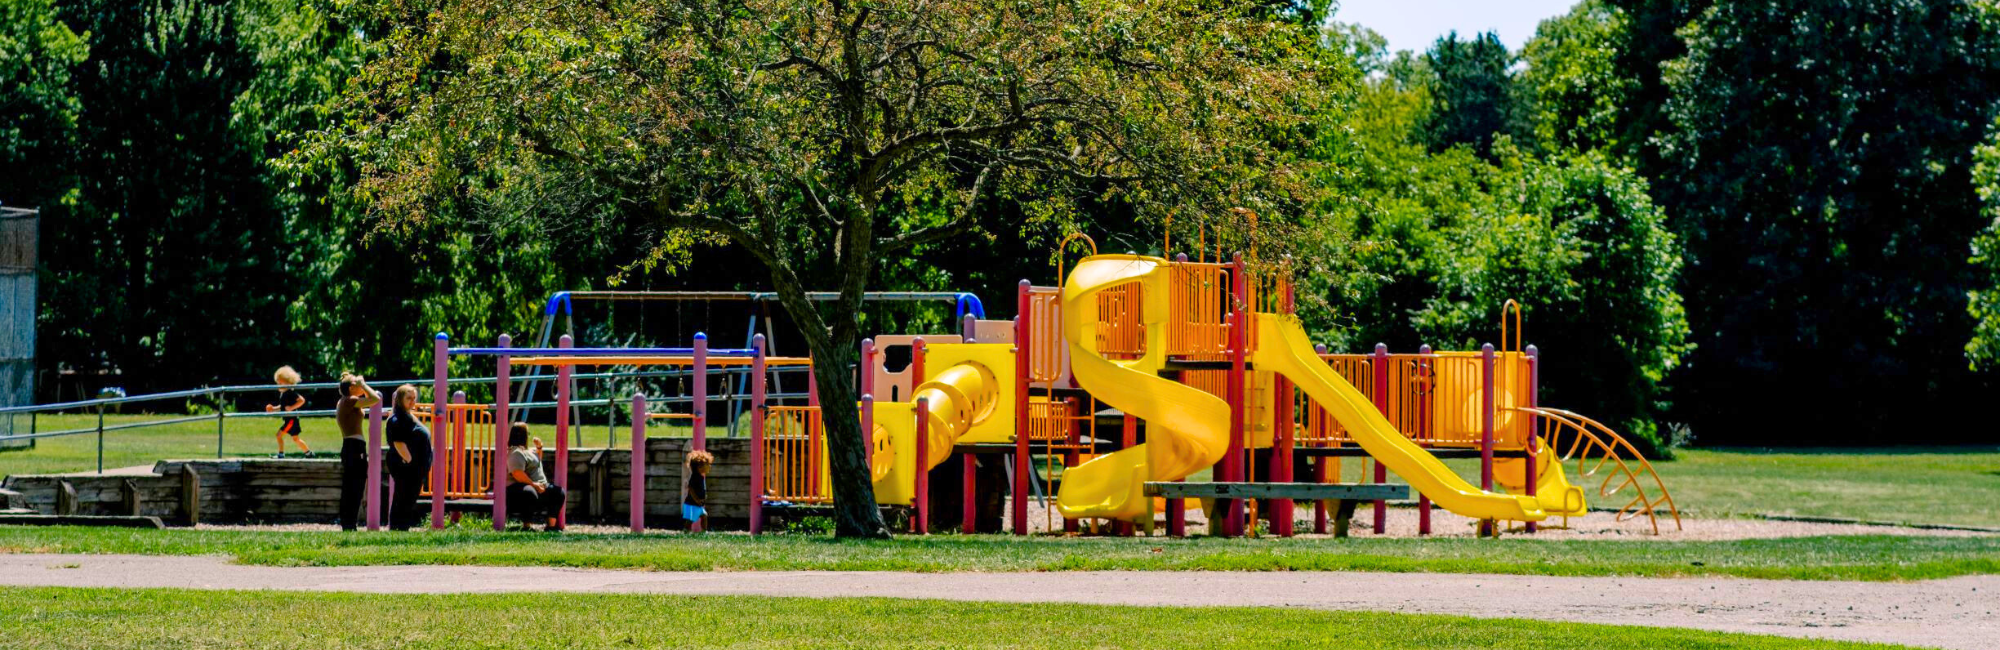 park with a large playground